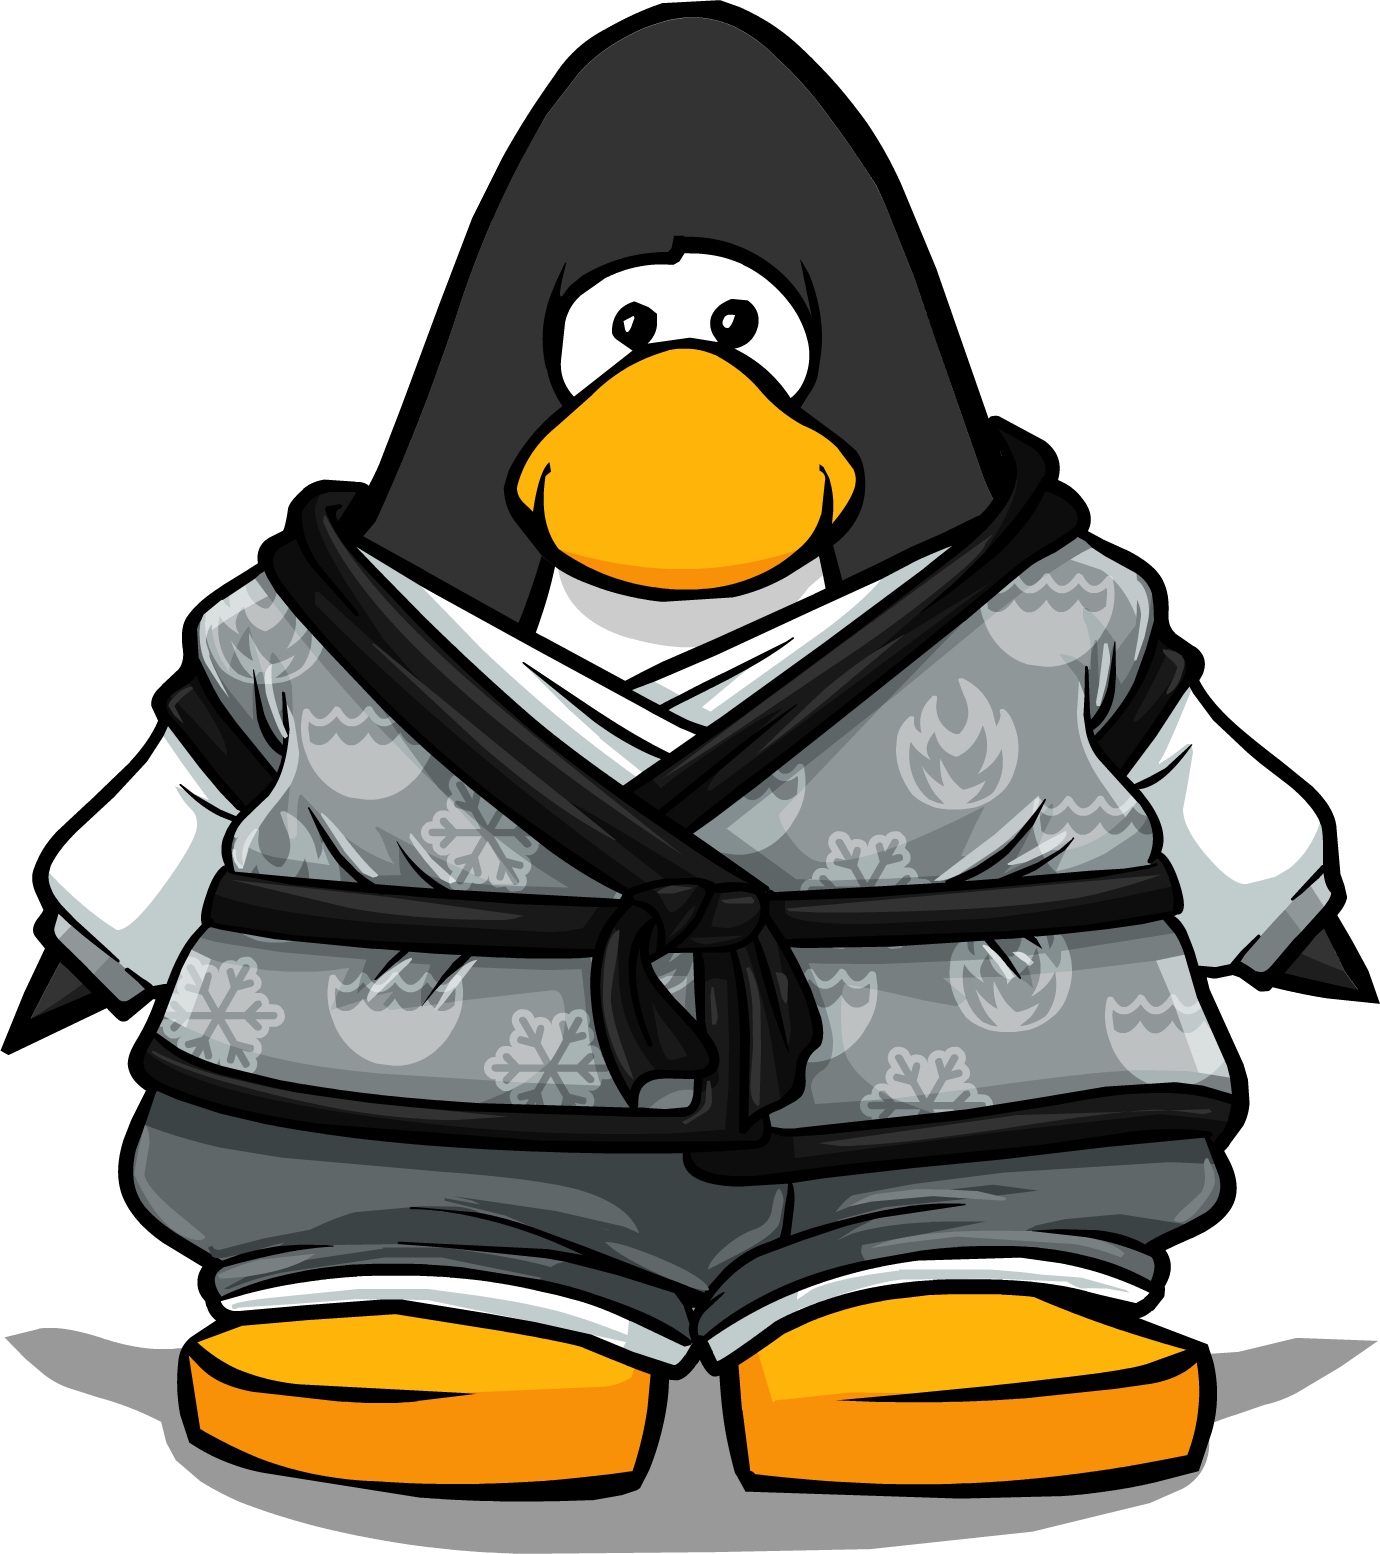 Tranquility Robe From A Player Card - Club Penguin Penguin Band Hoodie (1380x1554)